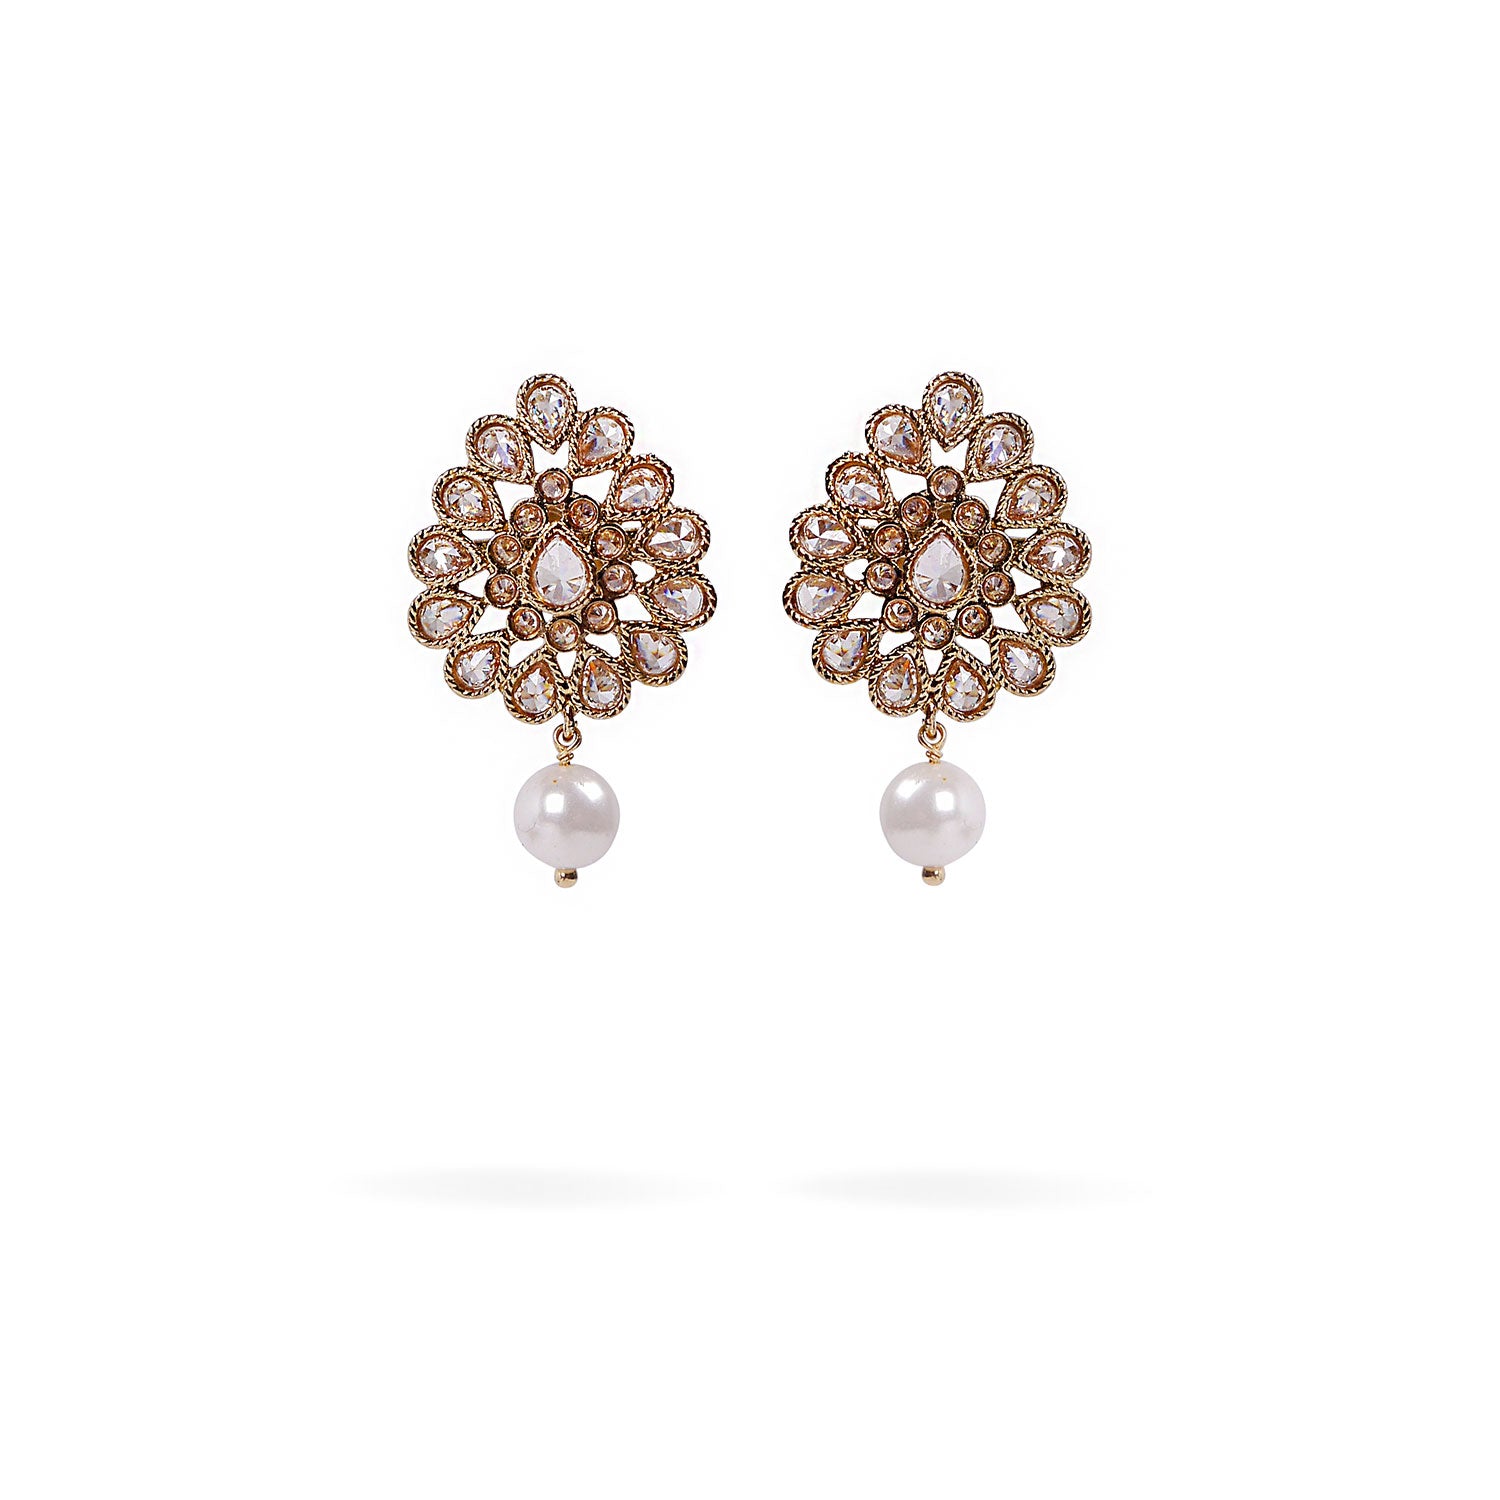 Farha Earrings in Pearl and Antique Gold